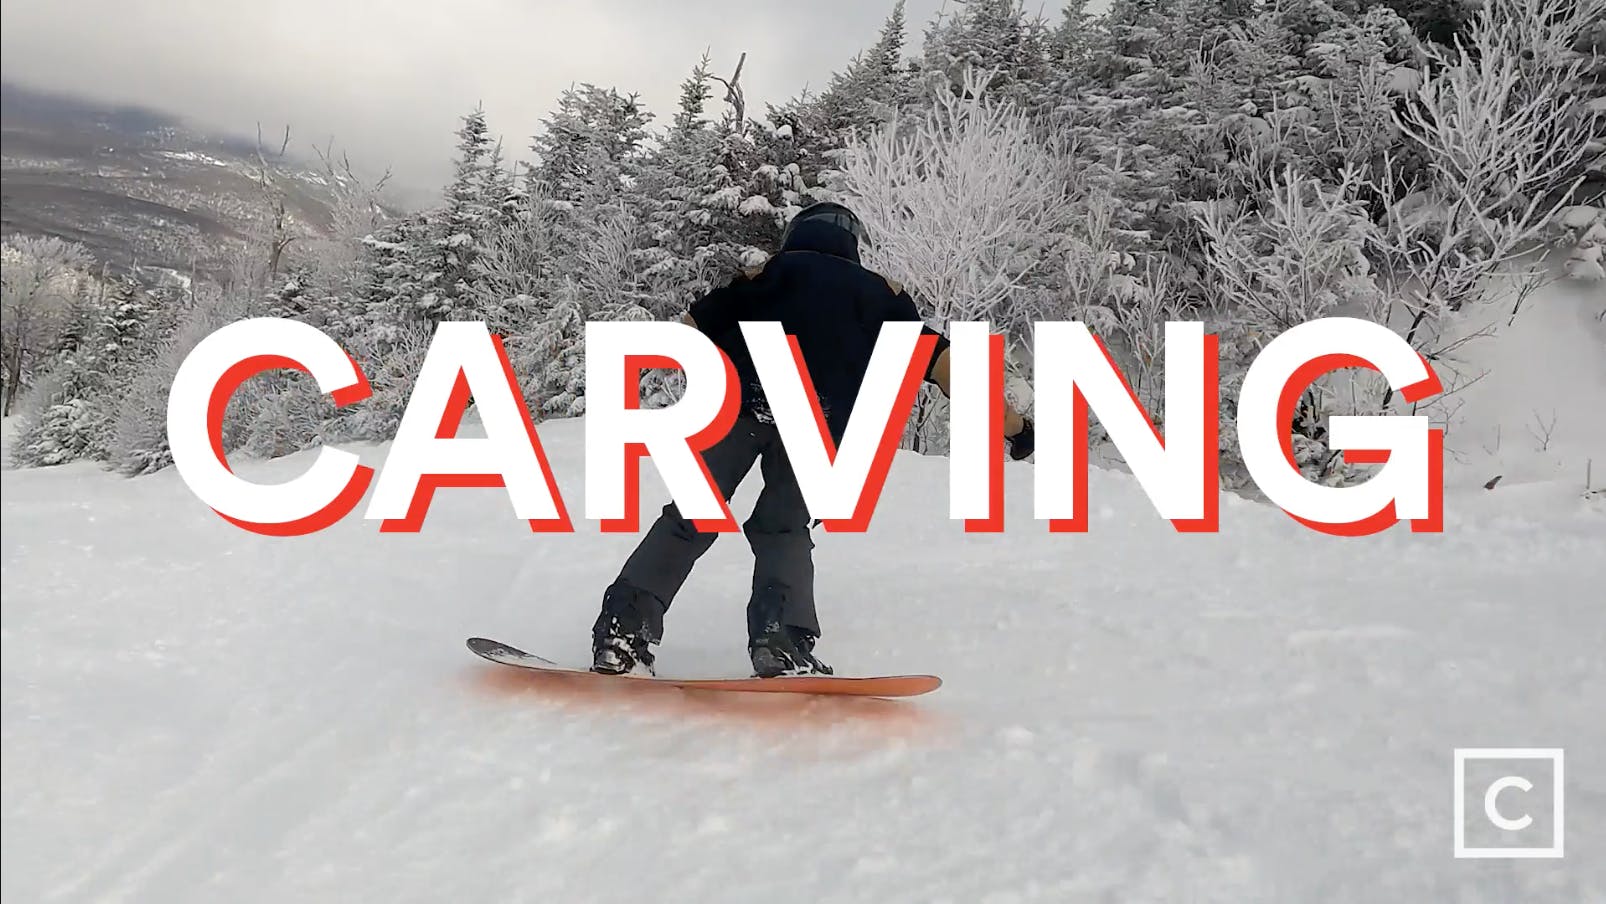 Curated expert Colby Henderson carving on the Never Summer Harpoon snowboard on a ski slope with a "Carving" graphic over the image